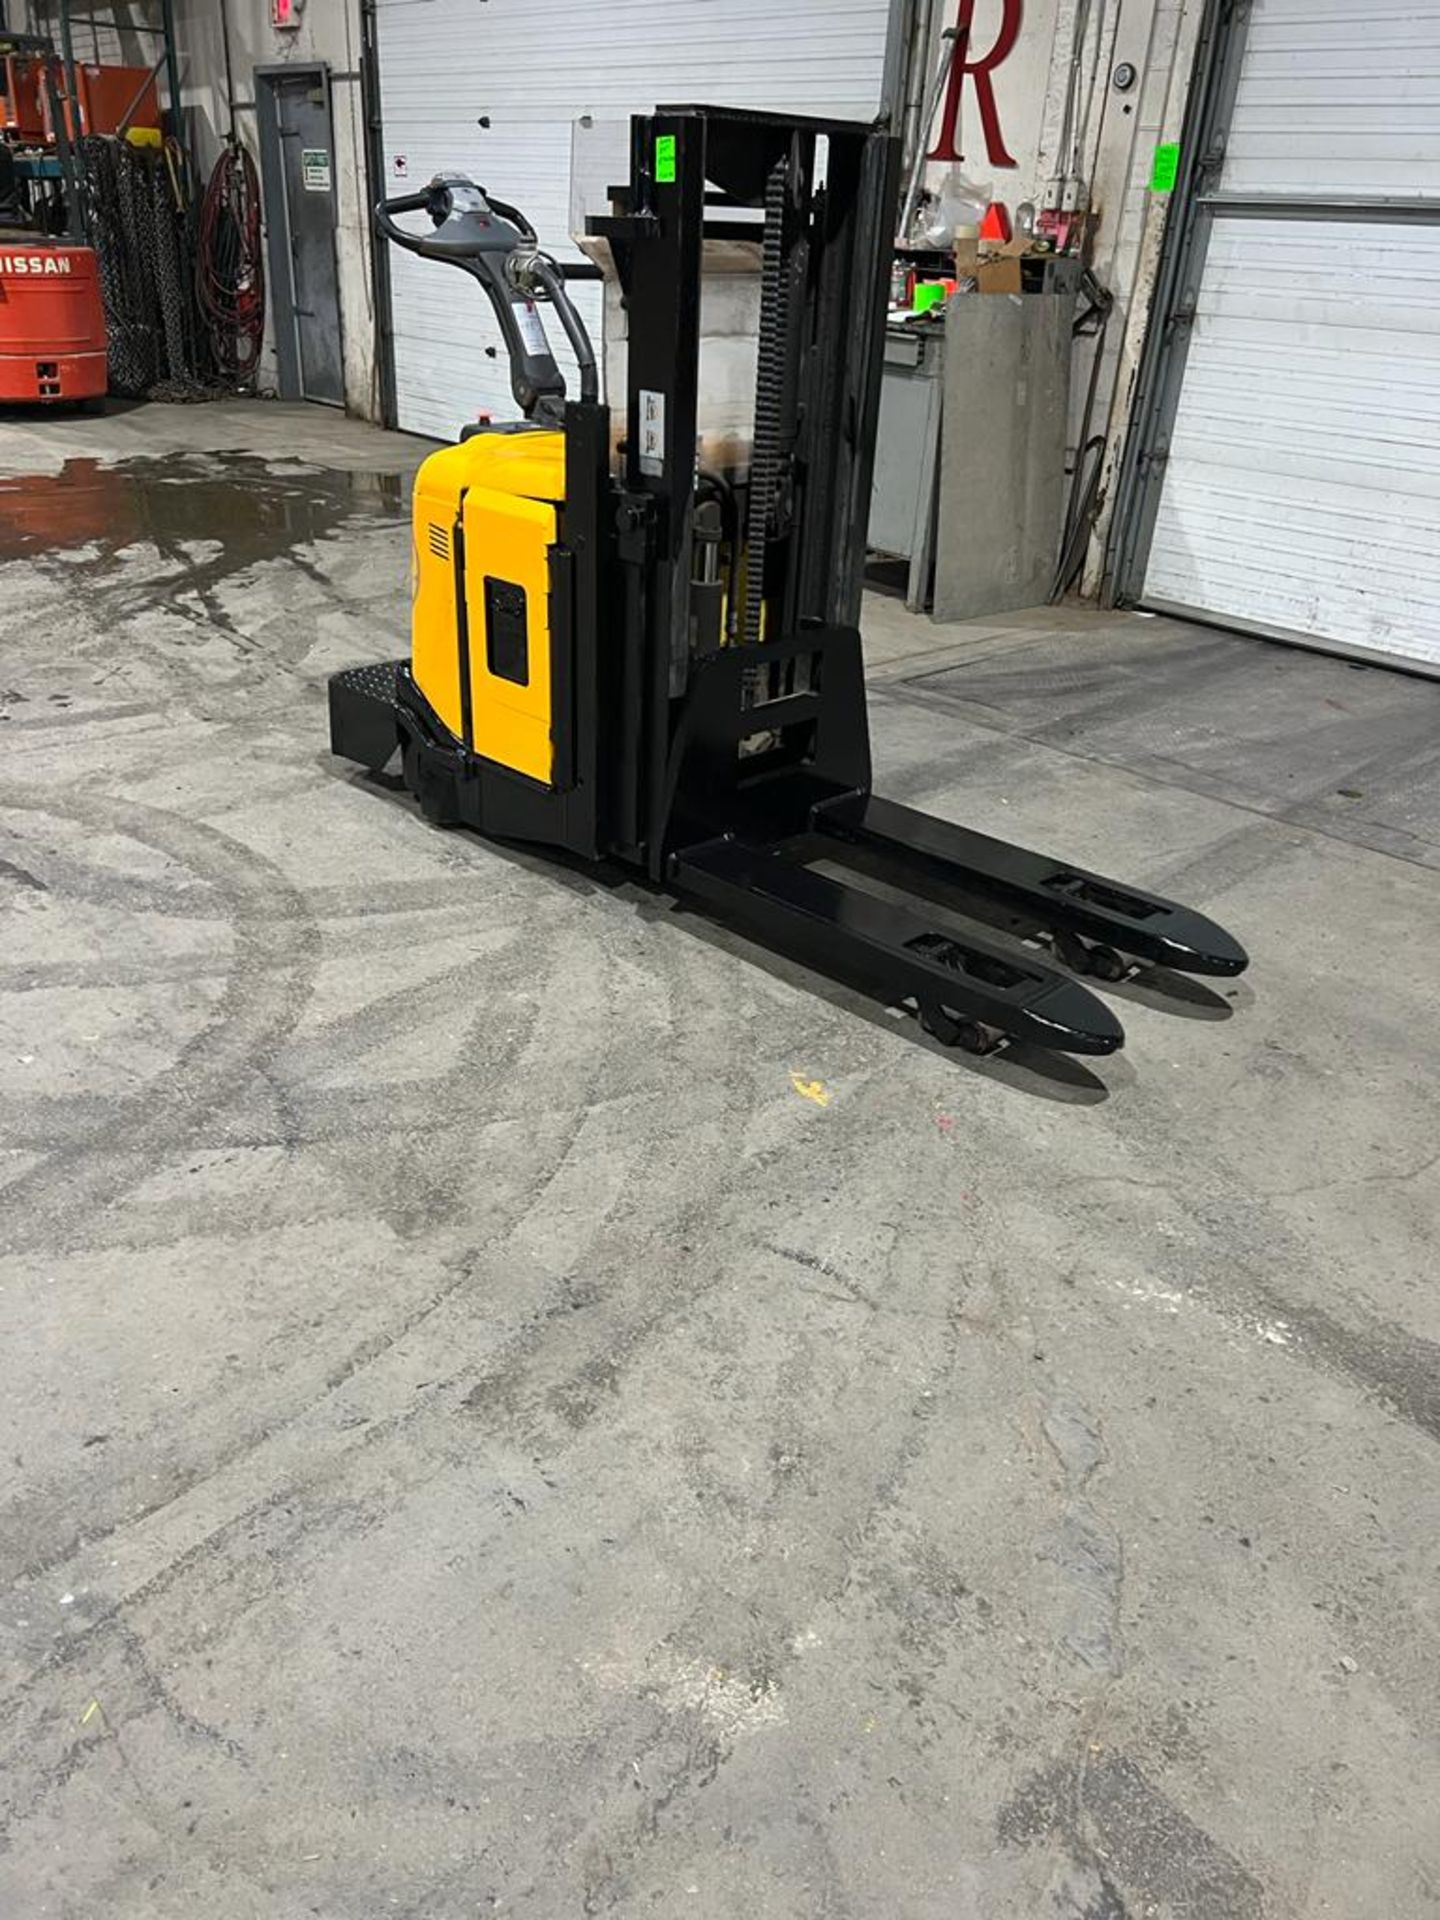 NICE BT Pallet Stacker RIDE ON 5000lbs capacity electric Powered Pallet Cart 24V with LOW HOURS FREE - Image 4 of 6